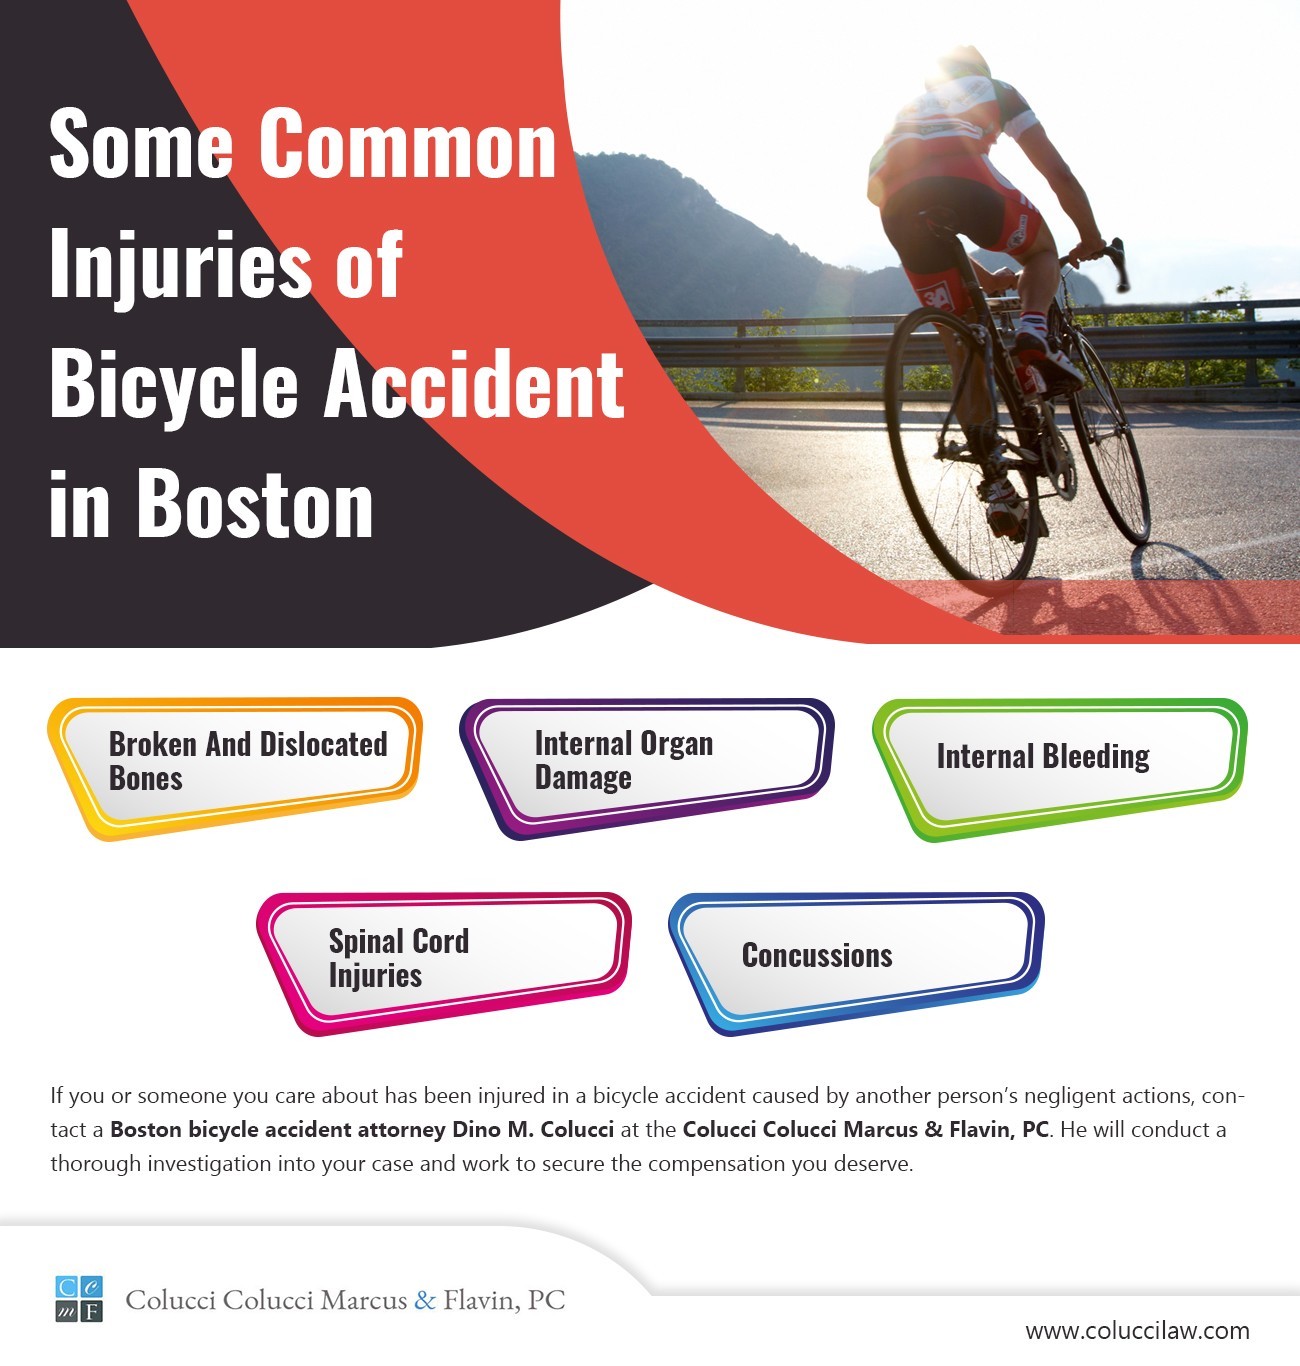 Some Common Injuries Of Bicycle Accident In Boston